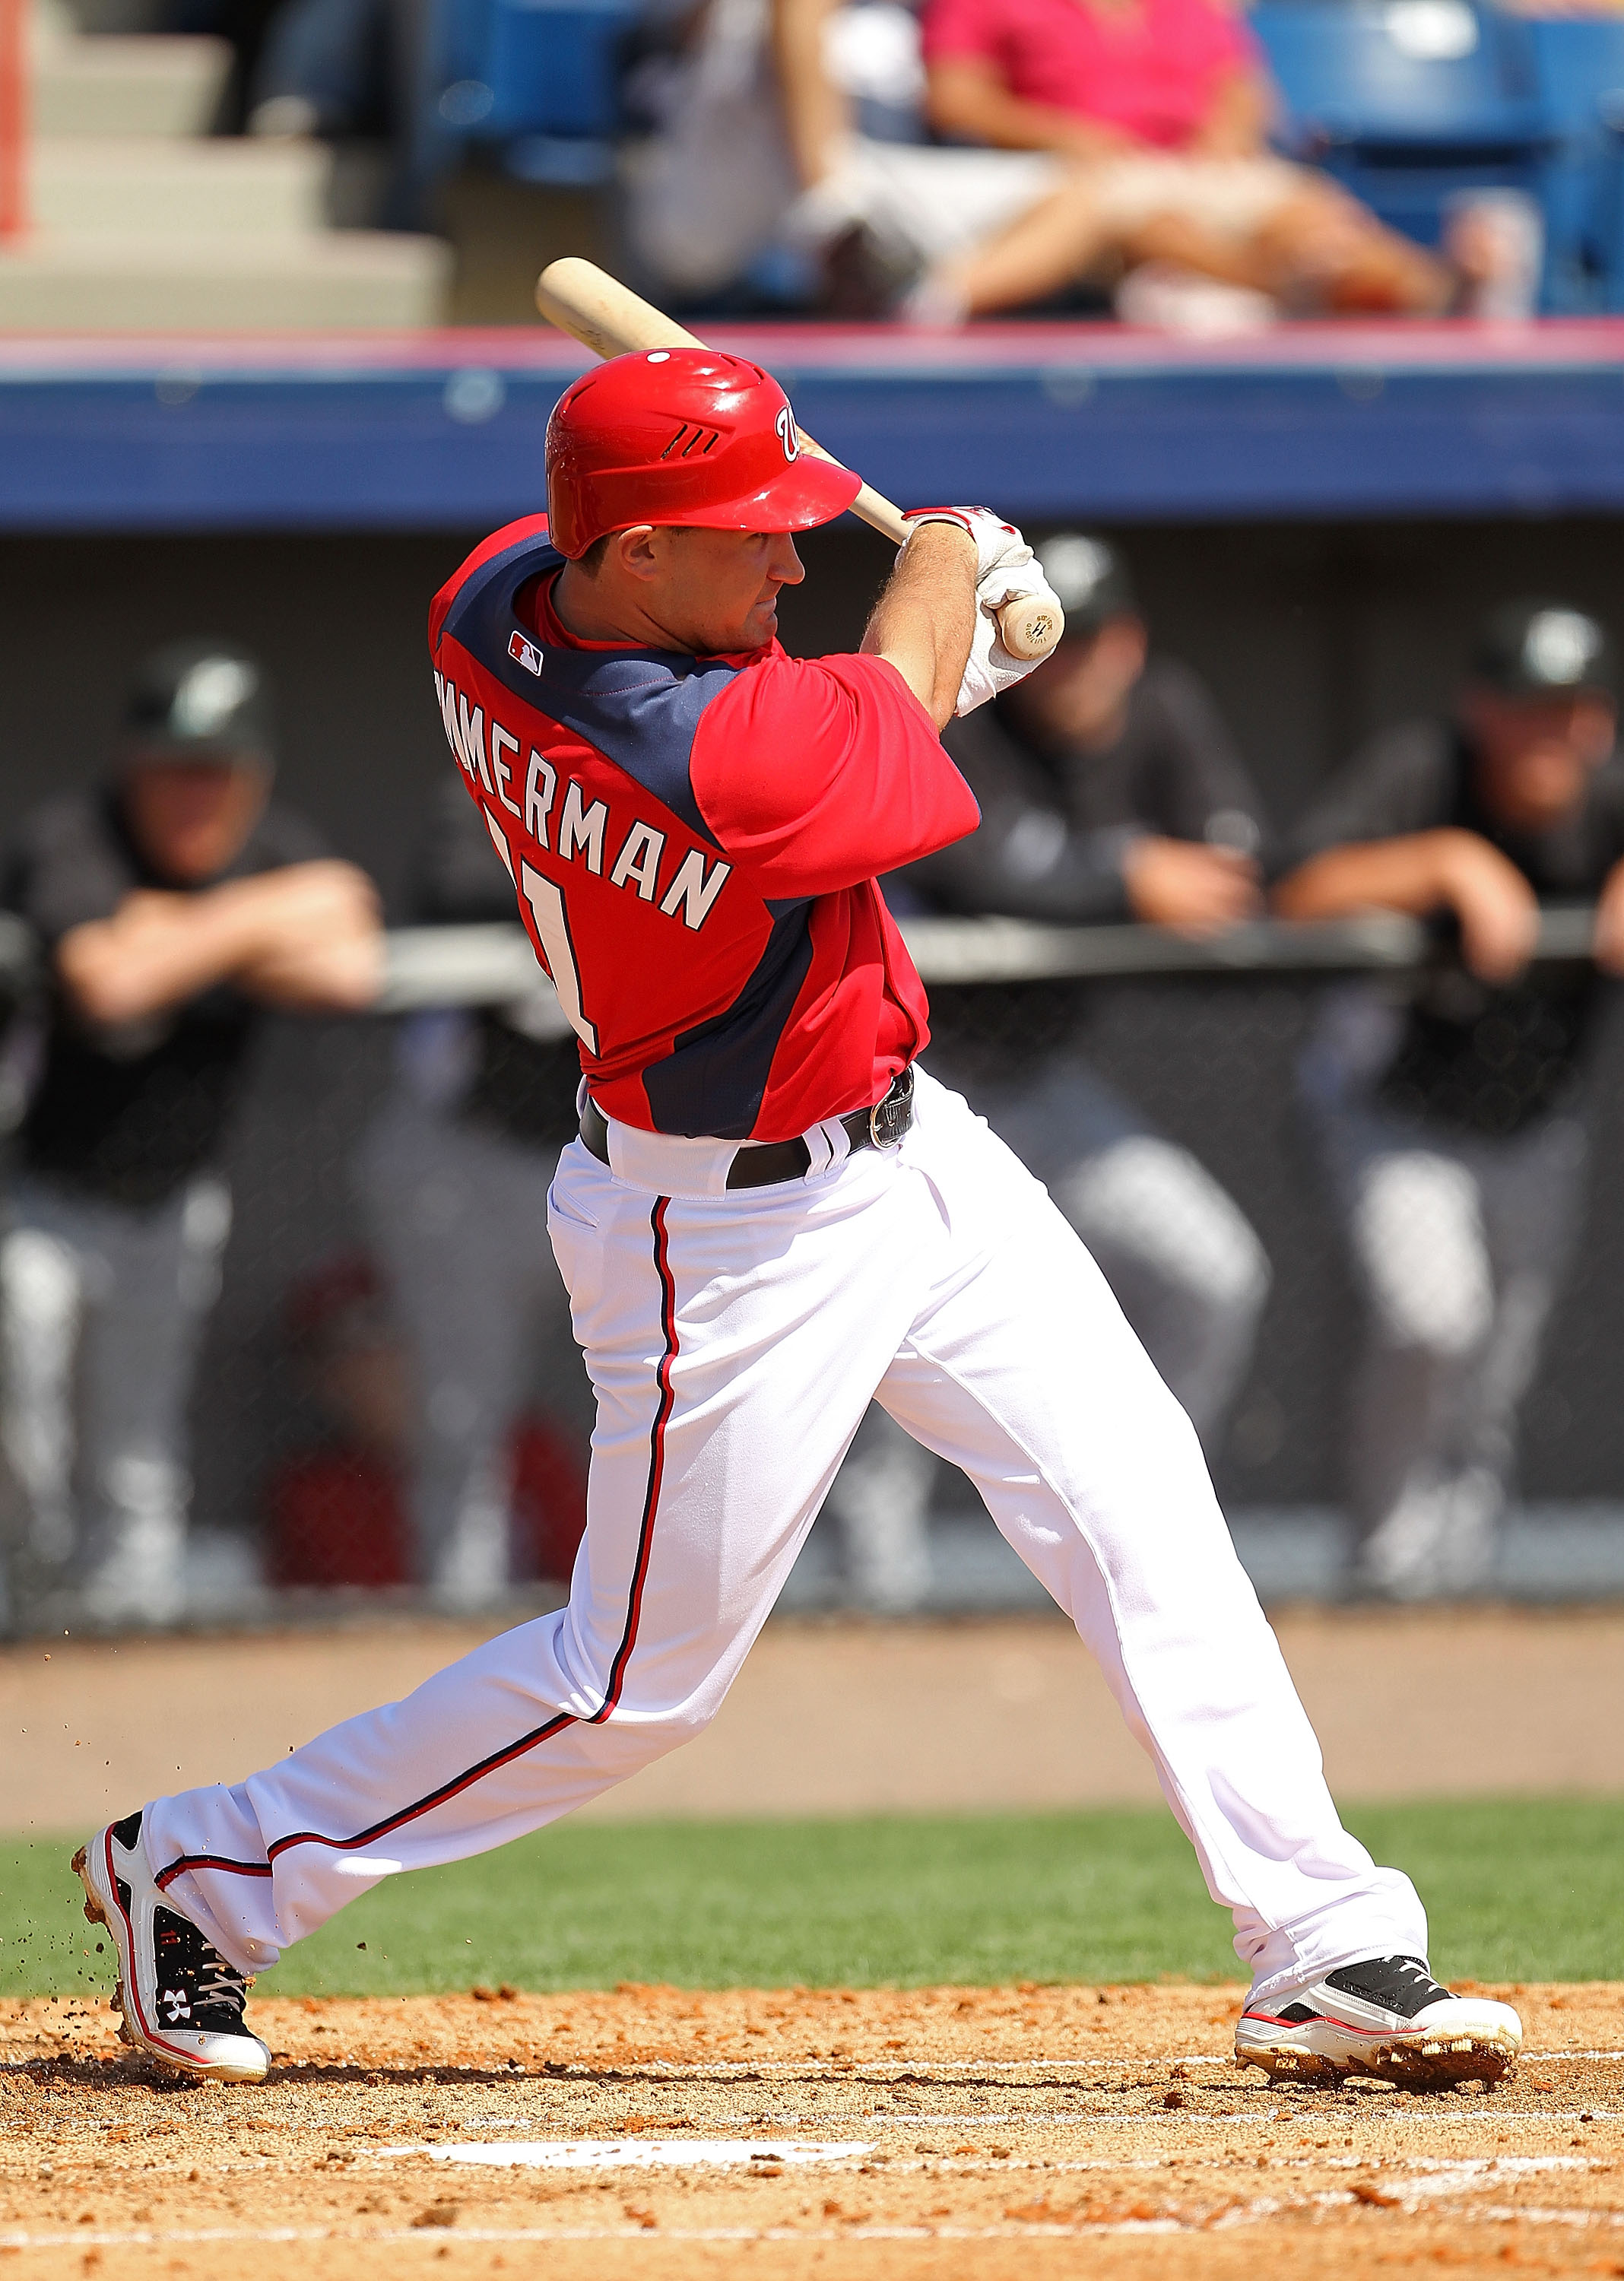 VIERA, FL - MARCH 02:  Ryan Zimmerman #11 of the Washington Nationals bats during a Spring Training game against the Florida Marlinsat Space Coast Stadium on March 2, 2011 in Viera, Florida.  (Photo by Mike Ehrmann/Getty Images)